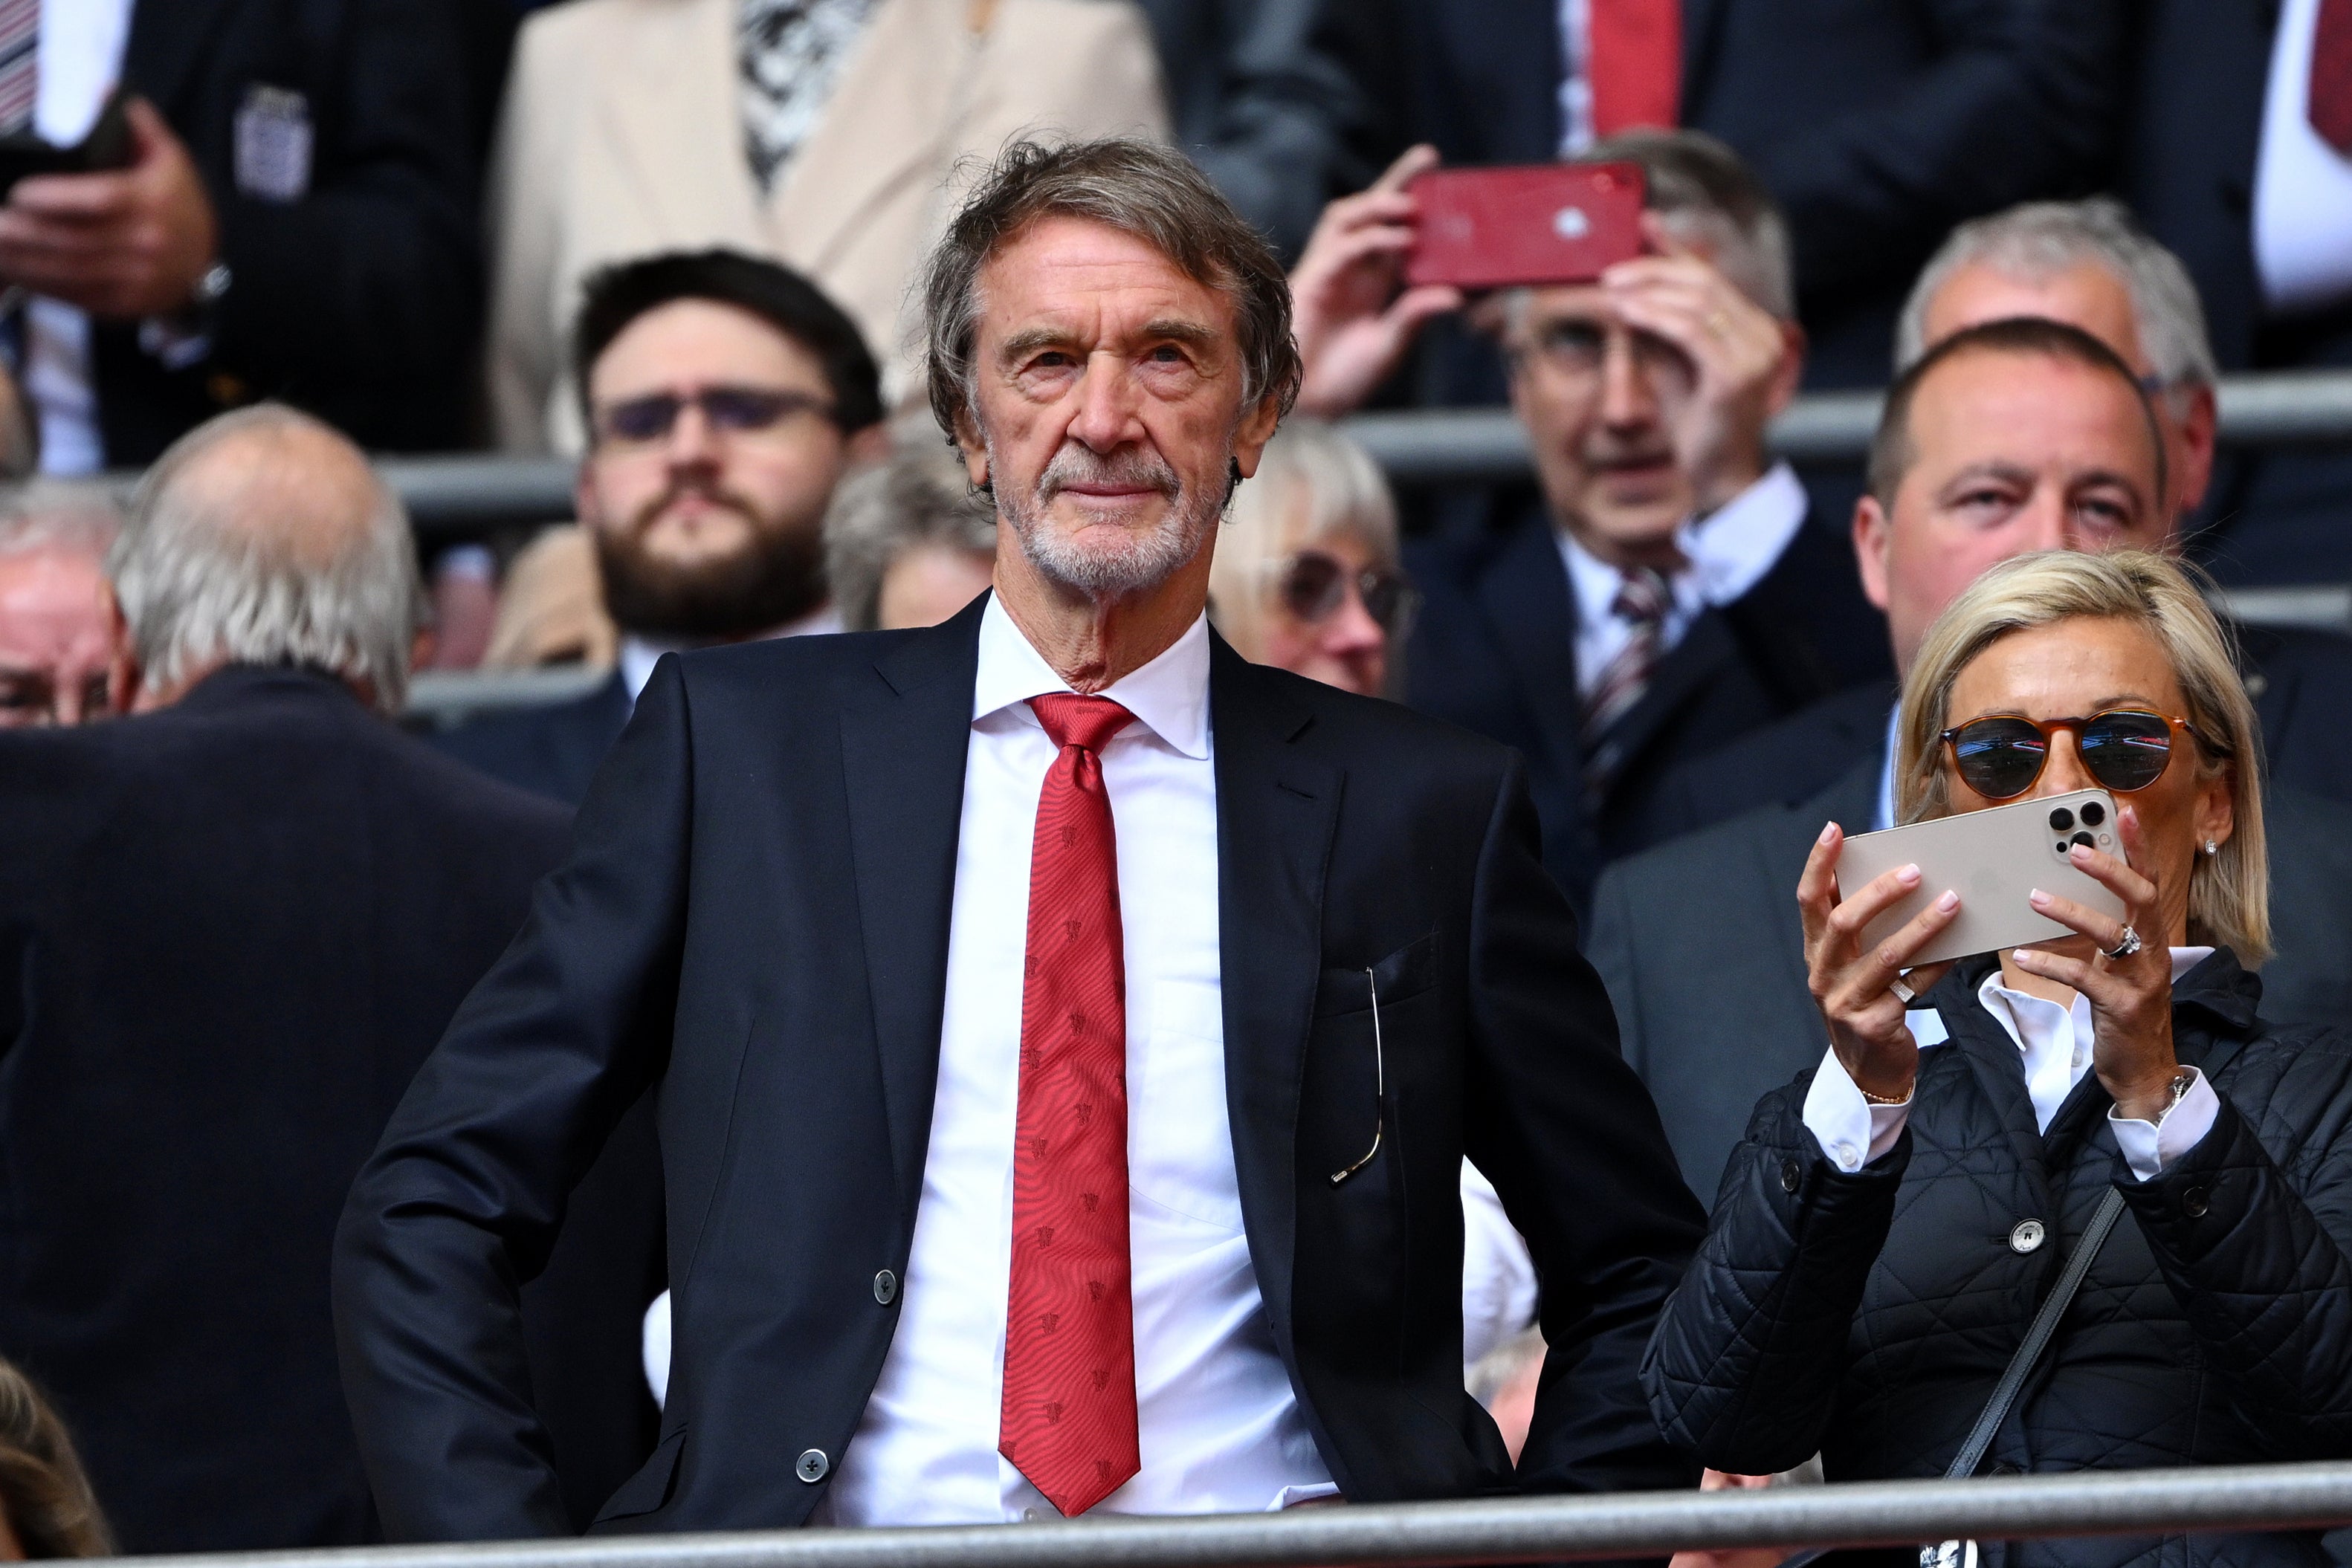 Sir Jim Ratcliffe has fired a warning about this summer’s transfer window